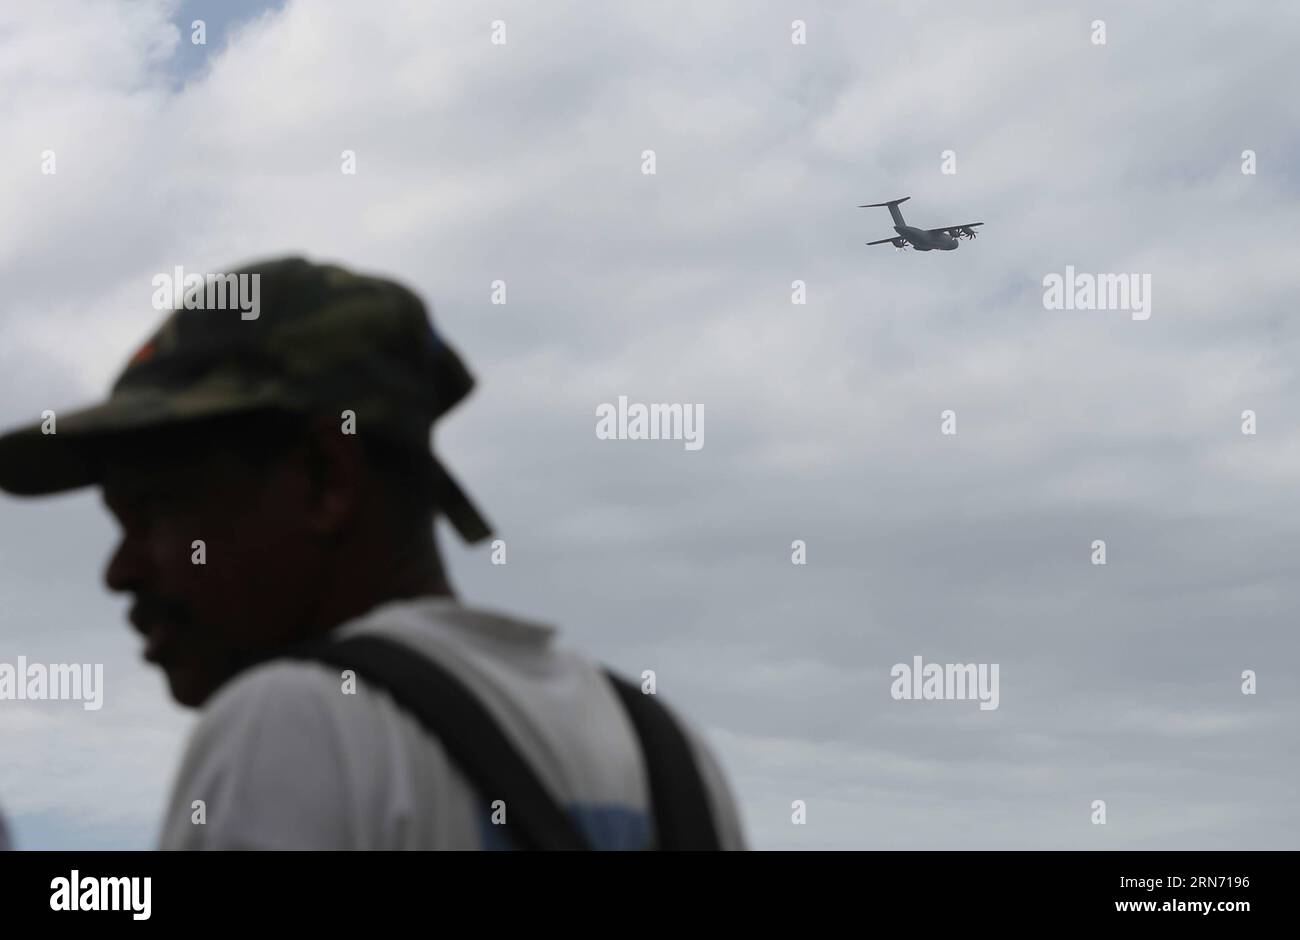 LA REUNION, Aug. 12, 2015 -- An aircraft searching for MH370 debris flies over the Saint Andre beach, France s oversea island La Reunion, on Aug. 12, 2015. La Reunion authority Monday said that no clues related to the missing flight MH370 has been found here since the launch of a tridimensional search last Friday. ) LA REUNION-MH370 DEBRIS-SEARCH-CONTINUE PanxSiwei PUBLICATIONxNOTxINxCHN   La Reunion Aug 12 2015 to Aircraft Searching for MH370 debris FLIES Over The Saint André Beach France S Oversea Iceland La Reunion ON Aug 12 2015 La Reunion Authority Monday Said Thatcher No clues RELATED to Stock Photo